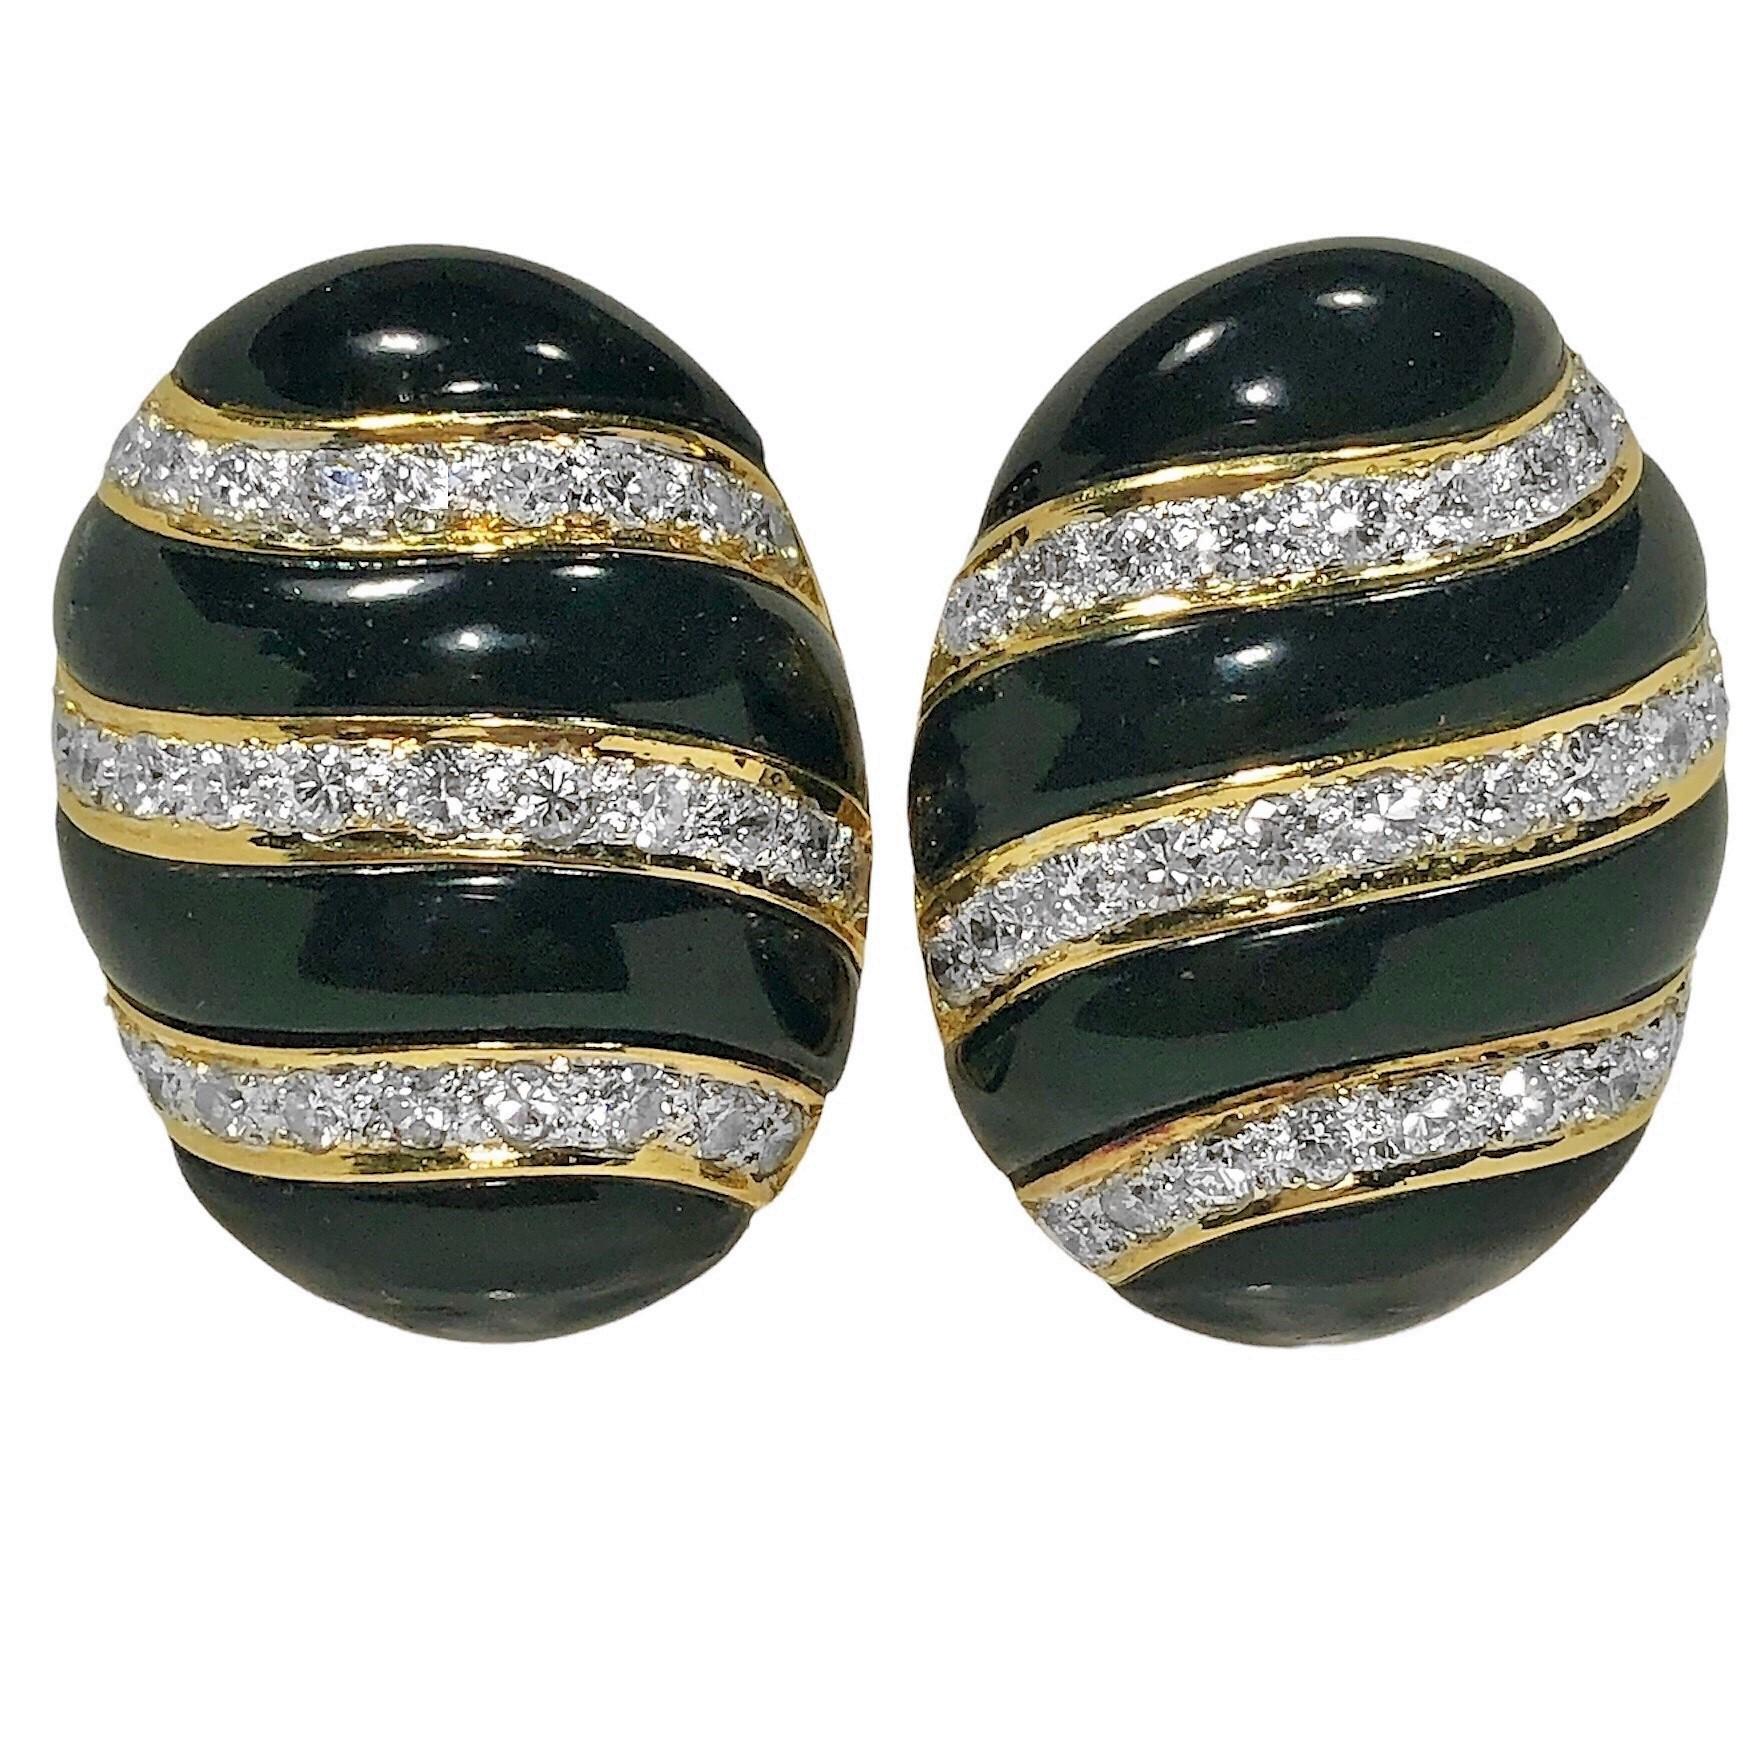 This lovely pair of 18k yellow gold, onyx and diamond earrings are crafted to the very highest level of quality. Set with 62 round brilliant cut diamonds having a total approximate weight of 2.00ct. of overall F/G color and VS1 clarity. The